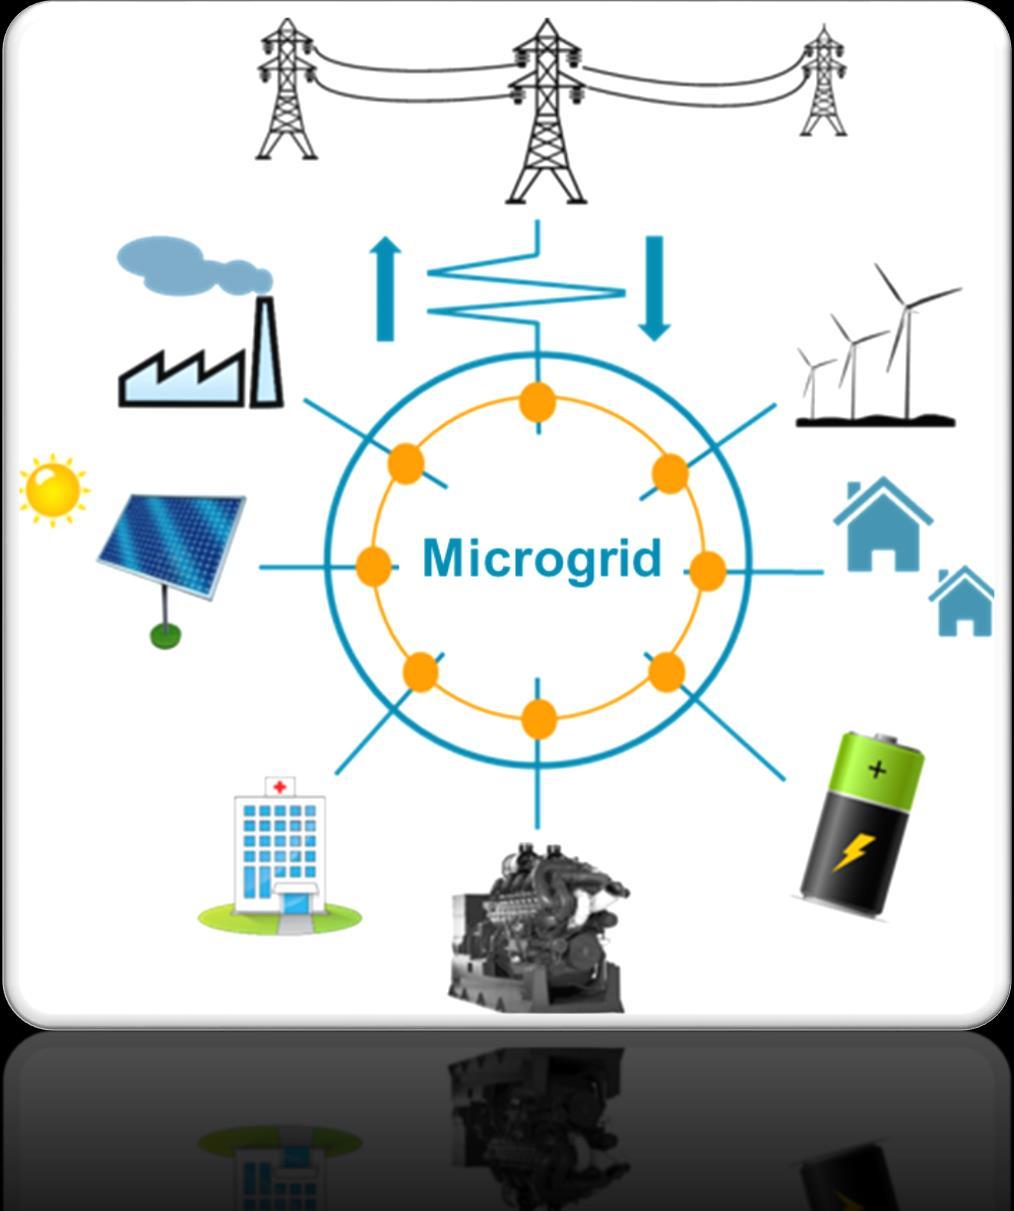 Distributed Energy Resources and Microgrids/Nanogrids DSOs an emerging role evolving towards information hubs to facilitate retail markets that allow customers to